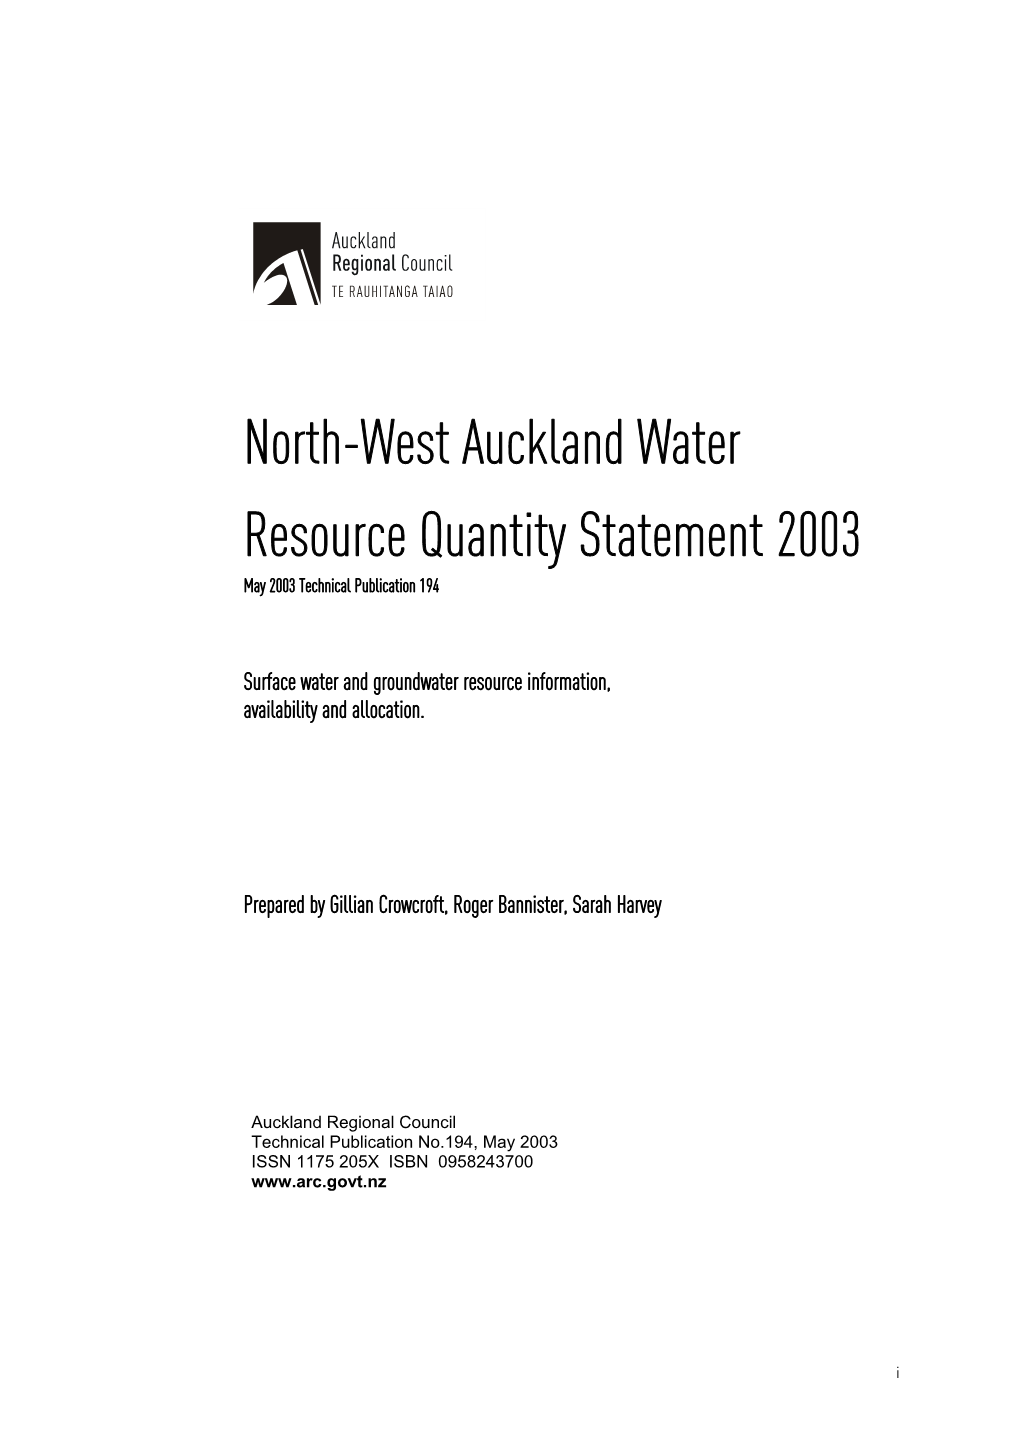 TP194 North-West Auckland Water Resource Quantity Statement 2003